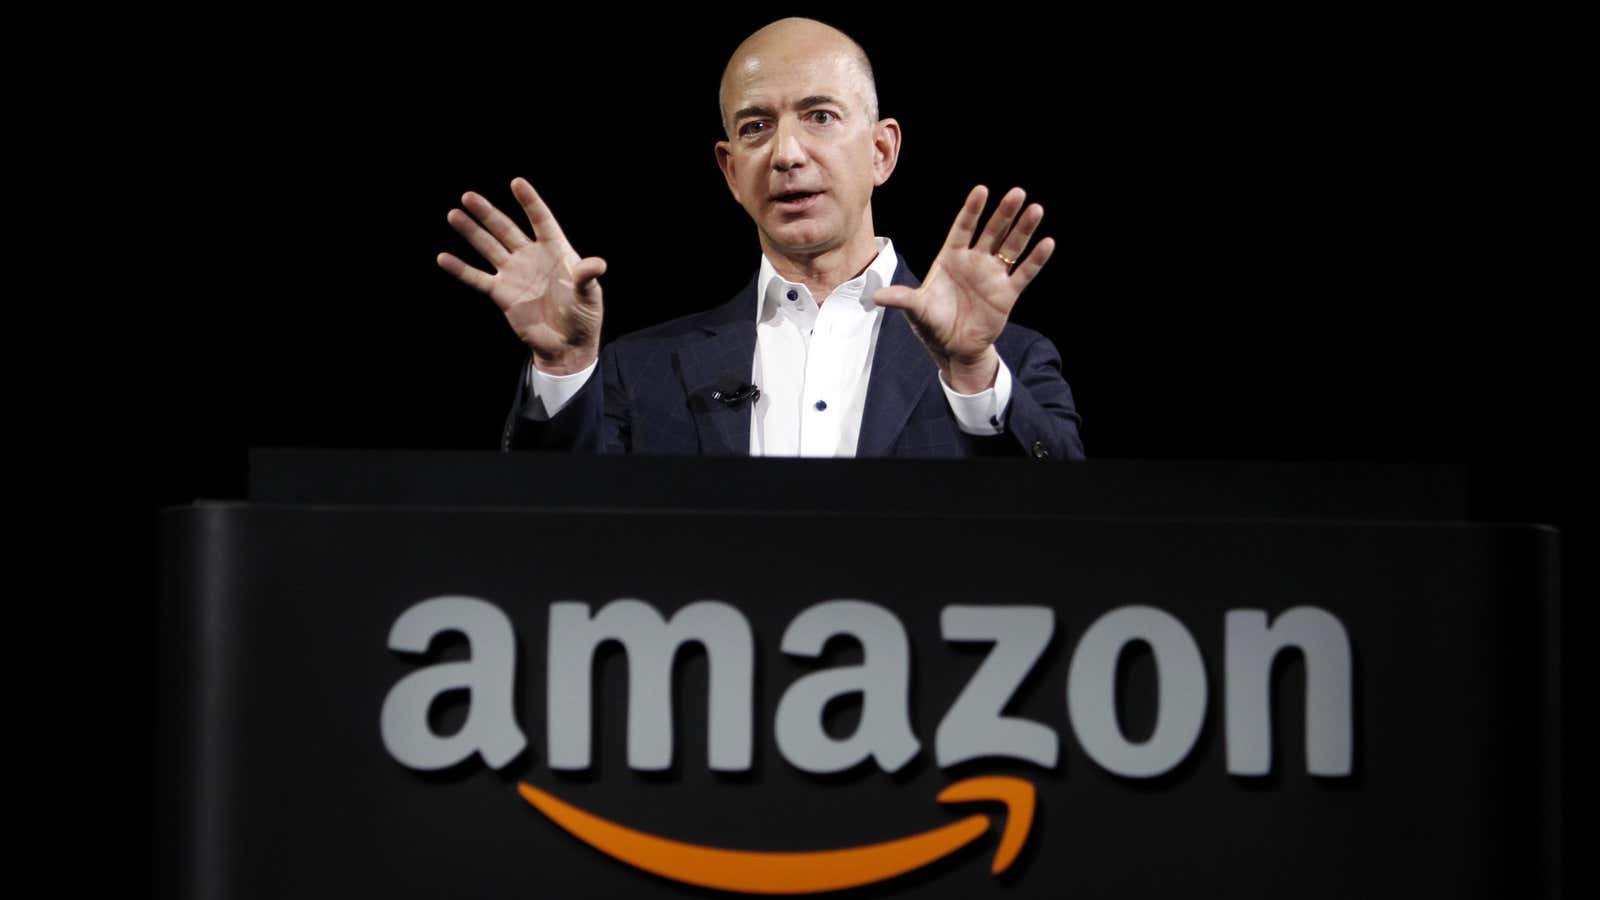 Jeff Bezos tends to make his competitors nervous.